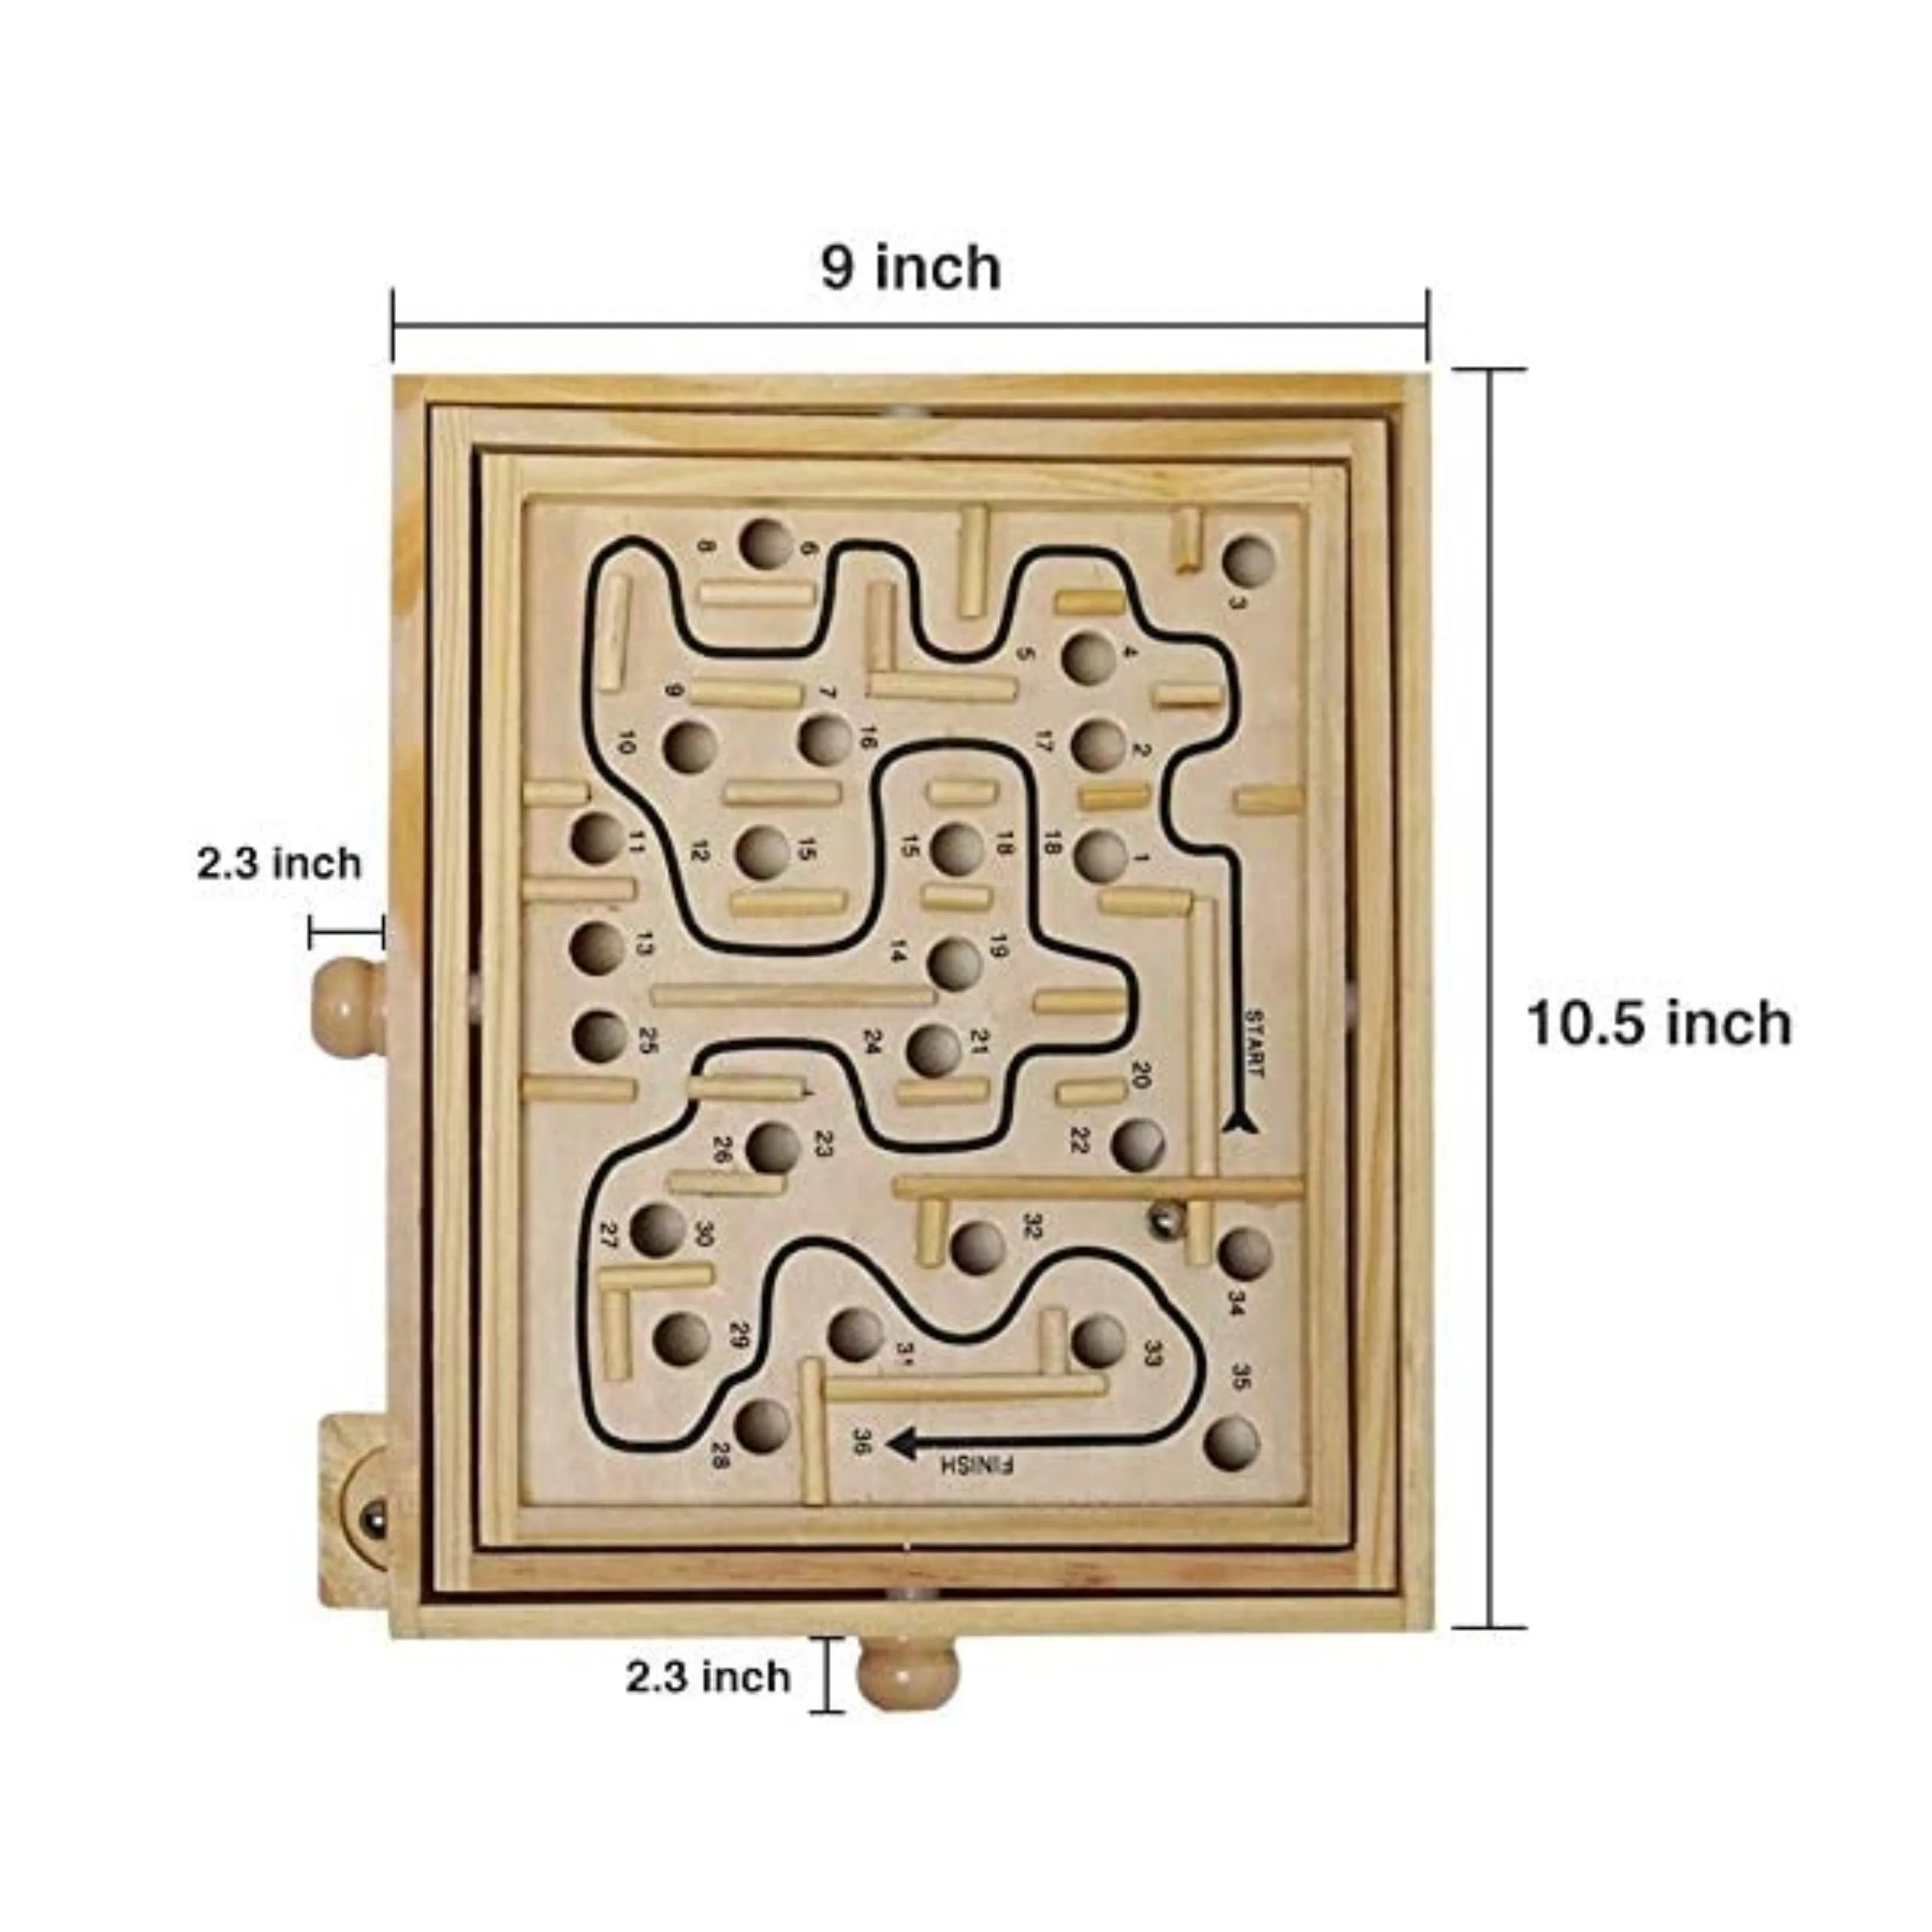 OEM Wooden Maze Game with Two Steel arbles, Wood Labyrinth  Puzzle Game Brain Game for Adults